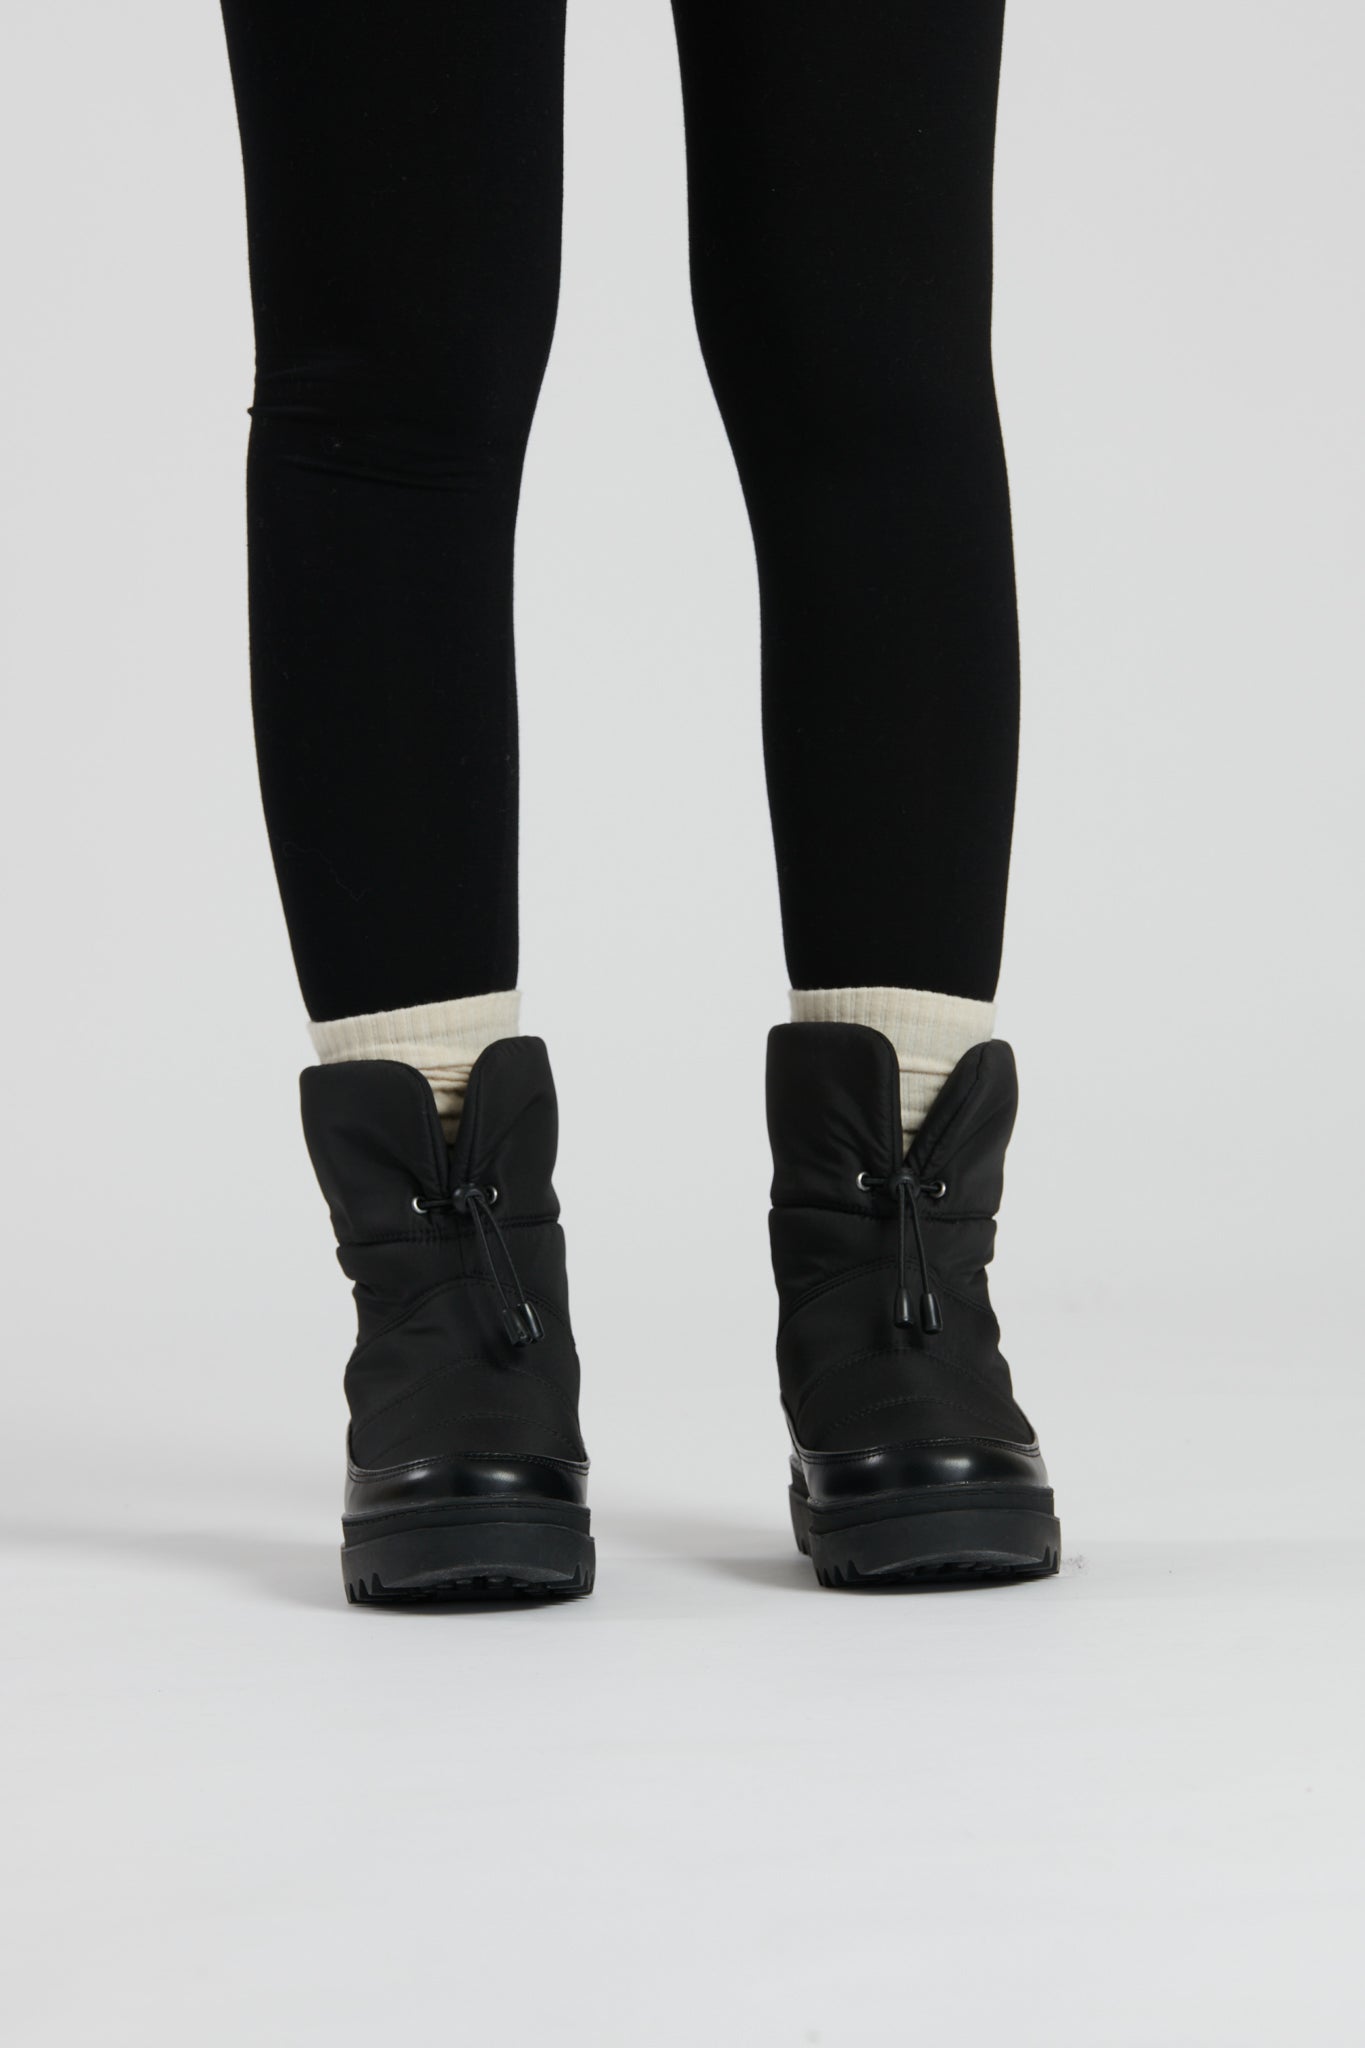 Summit padded snow boots in black – South Beach